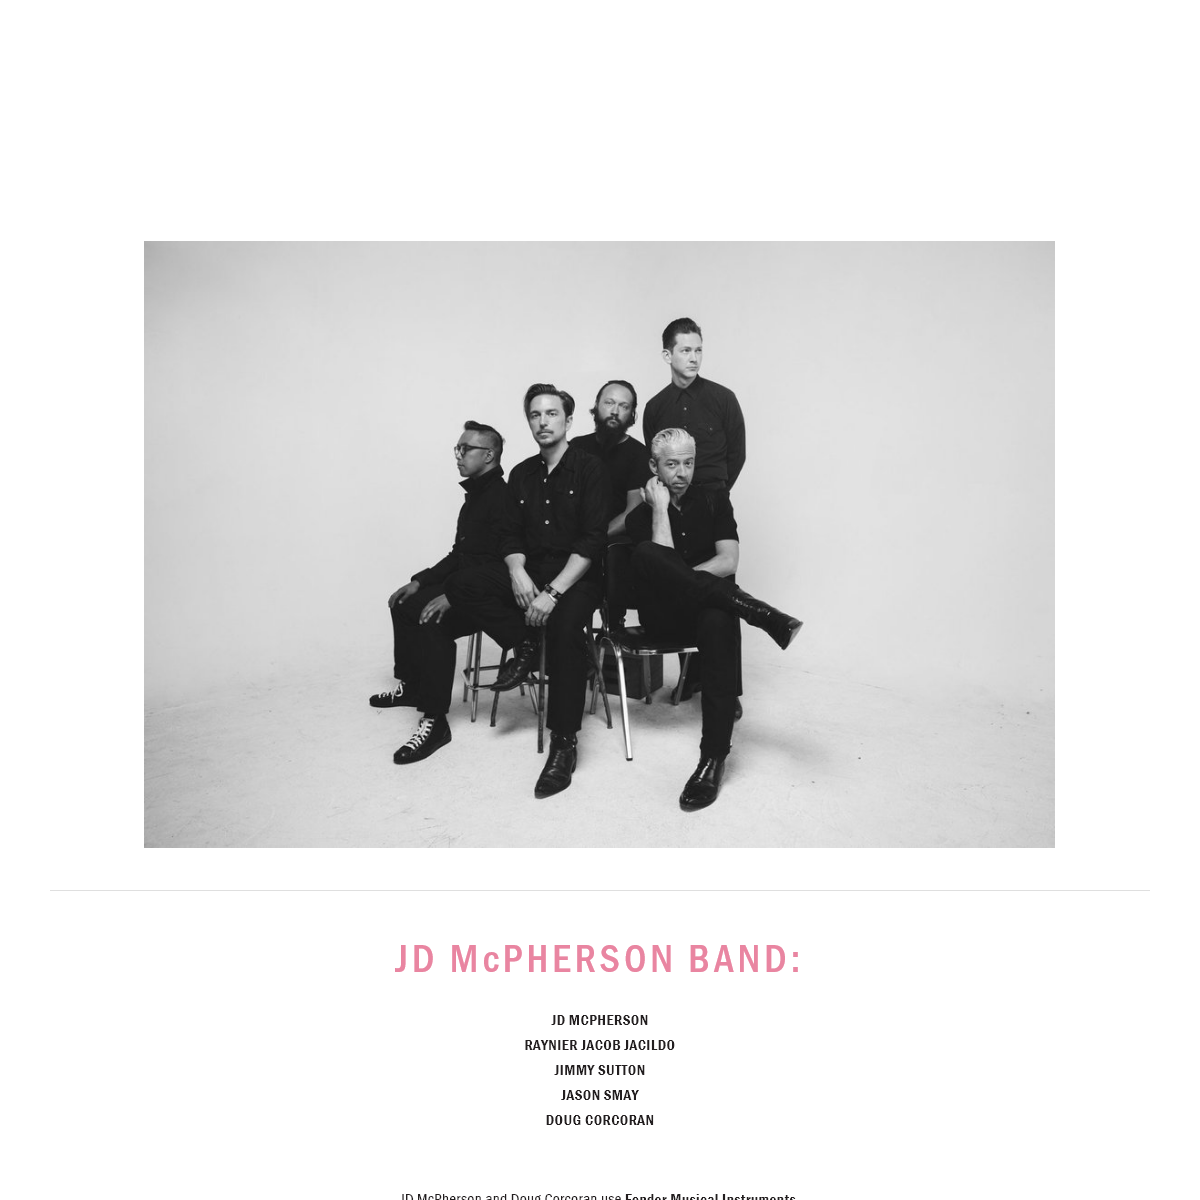 A complete backup of jdmcpherson.com